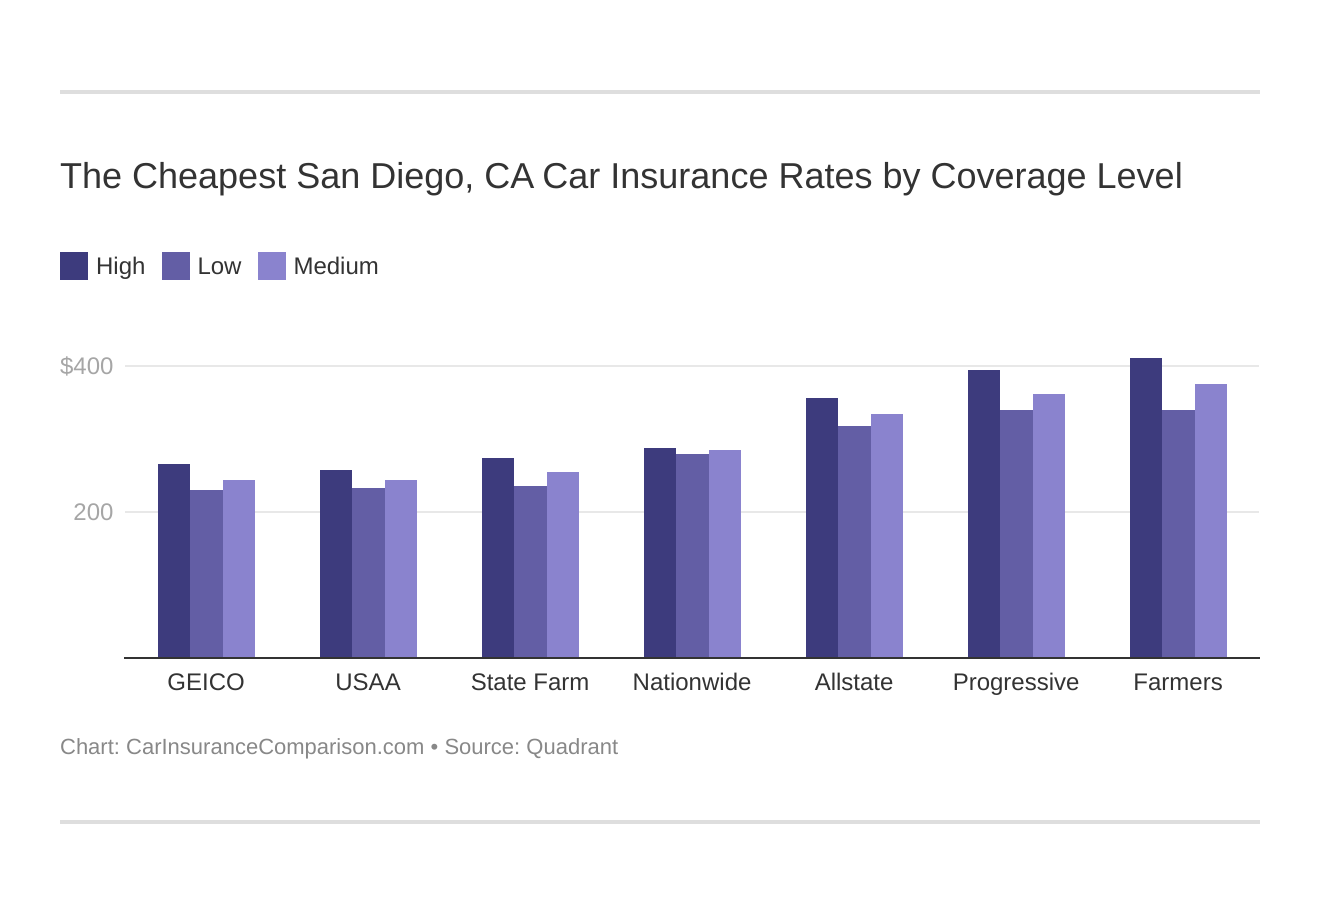 The Cheapest San Diego, CA Car Insurance Rates by Coverage Level